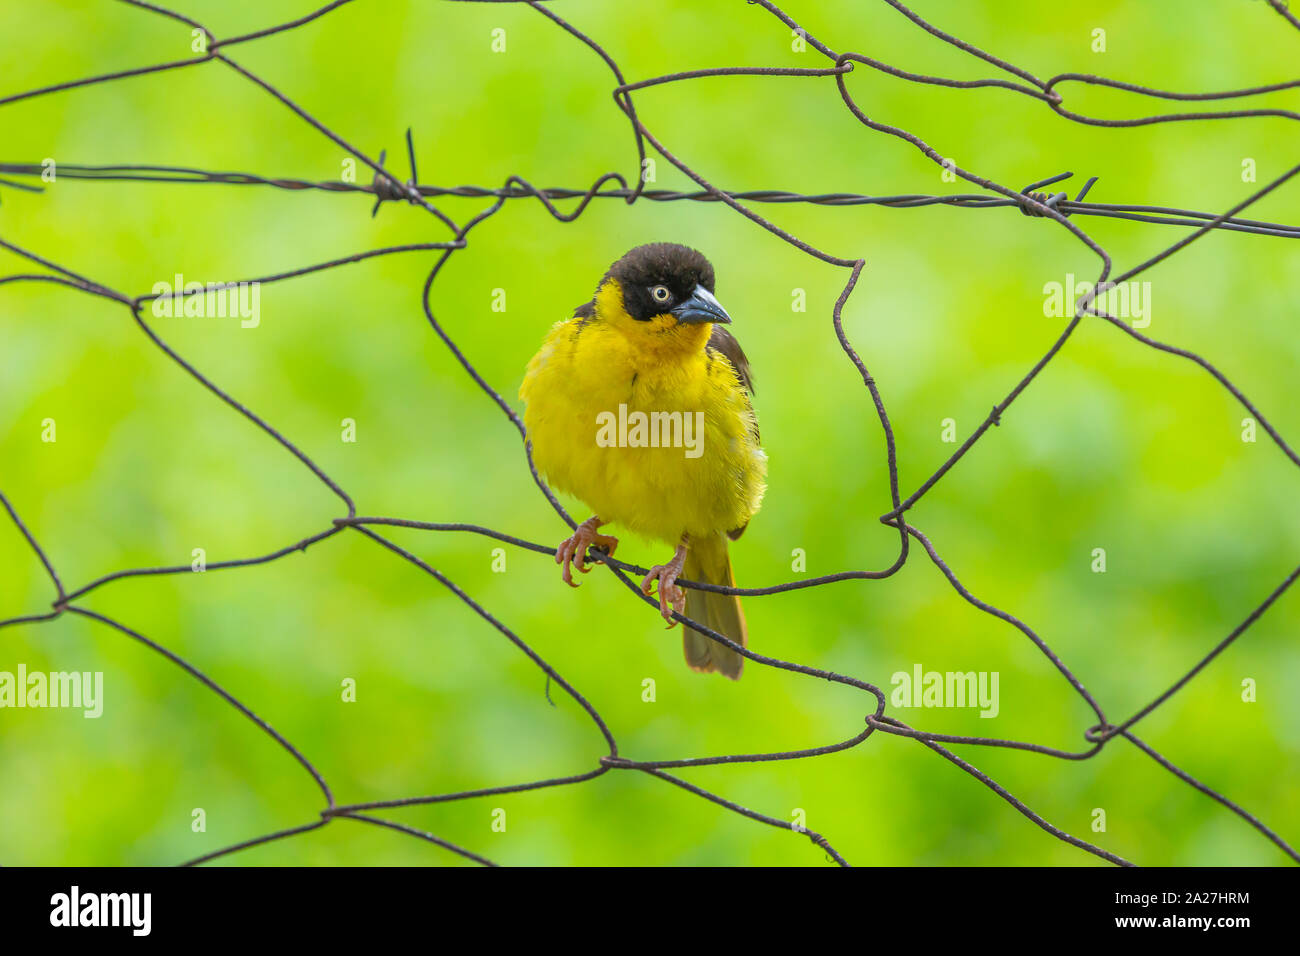 Colour photograph of the Black-headed weaver perched within chain-link fencing, Taken in Kenya. Stock Photo